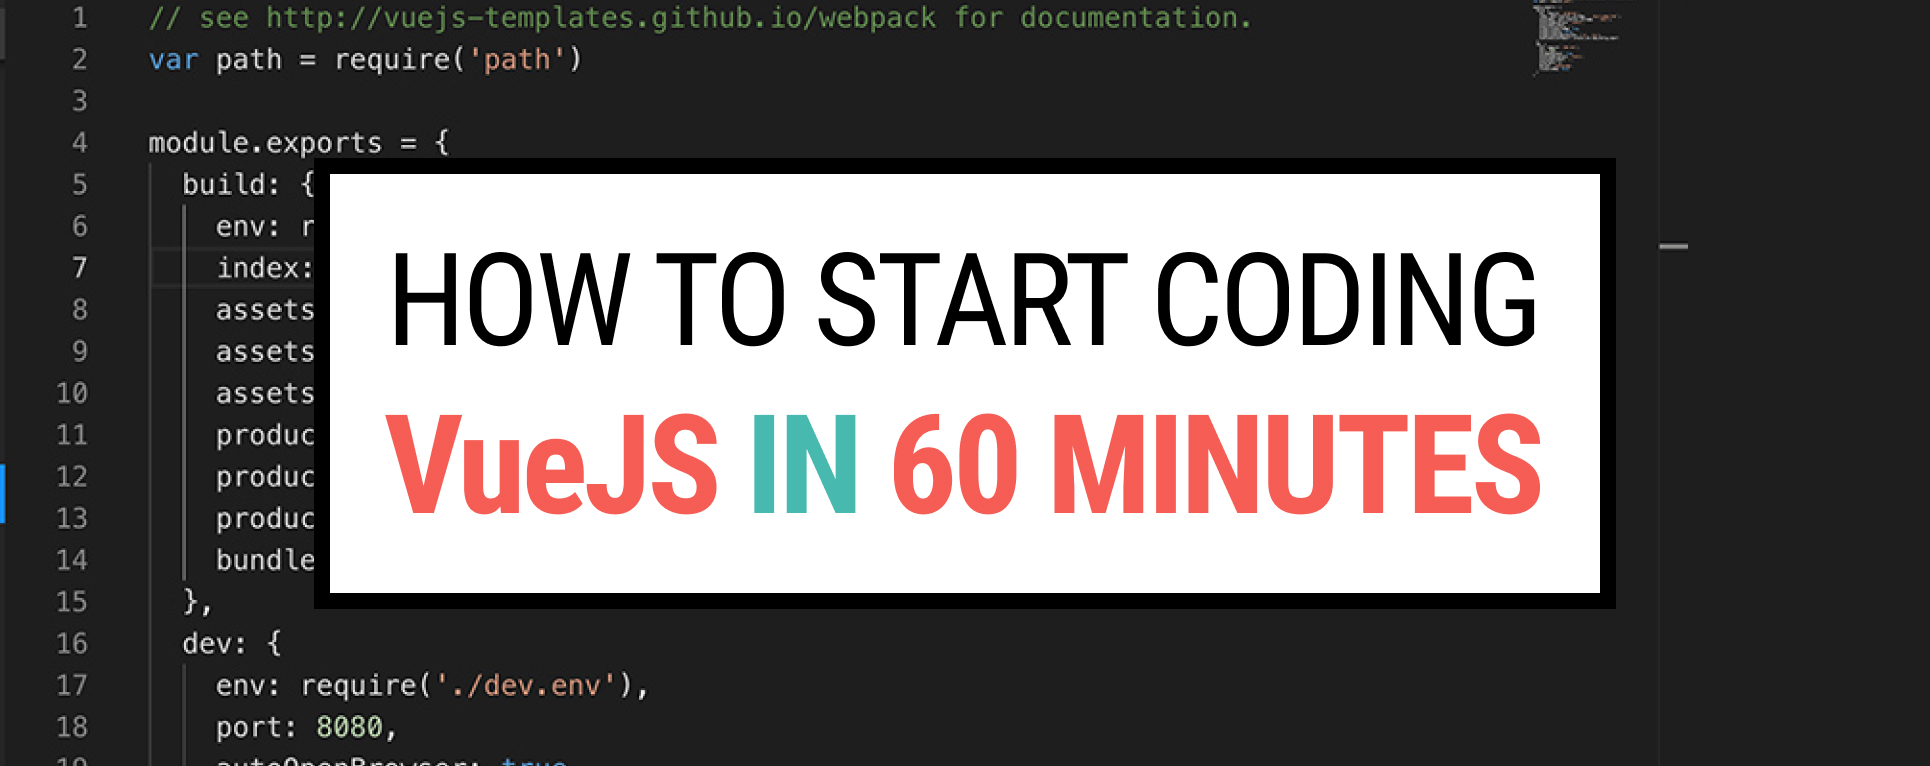 How to start coding VueJS in 60 minutes